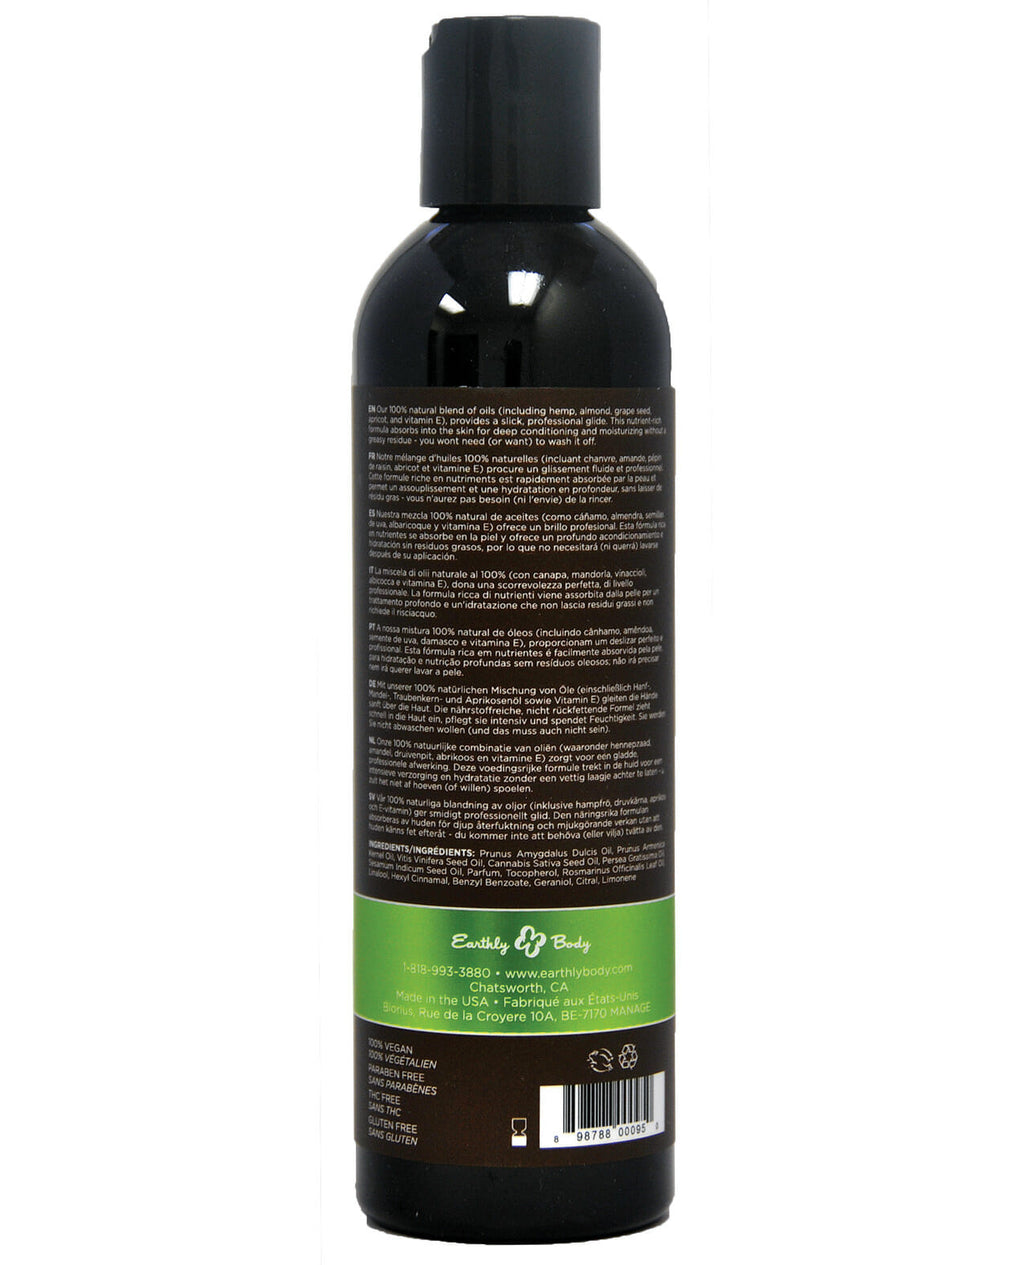 Earthly Body Naked in the Woods Massage Body Oil - 8 oz